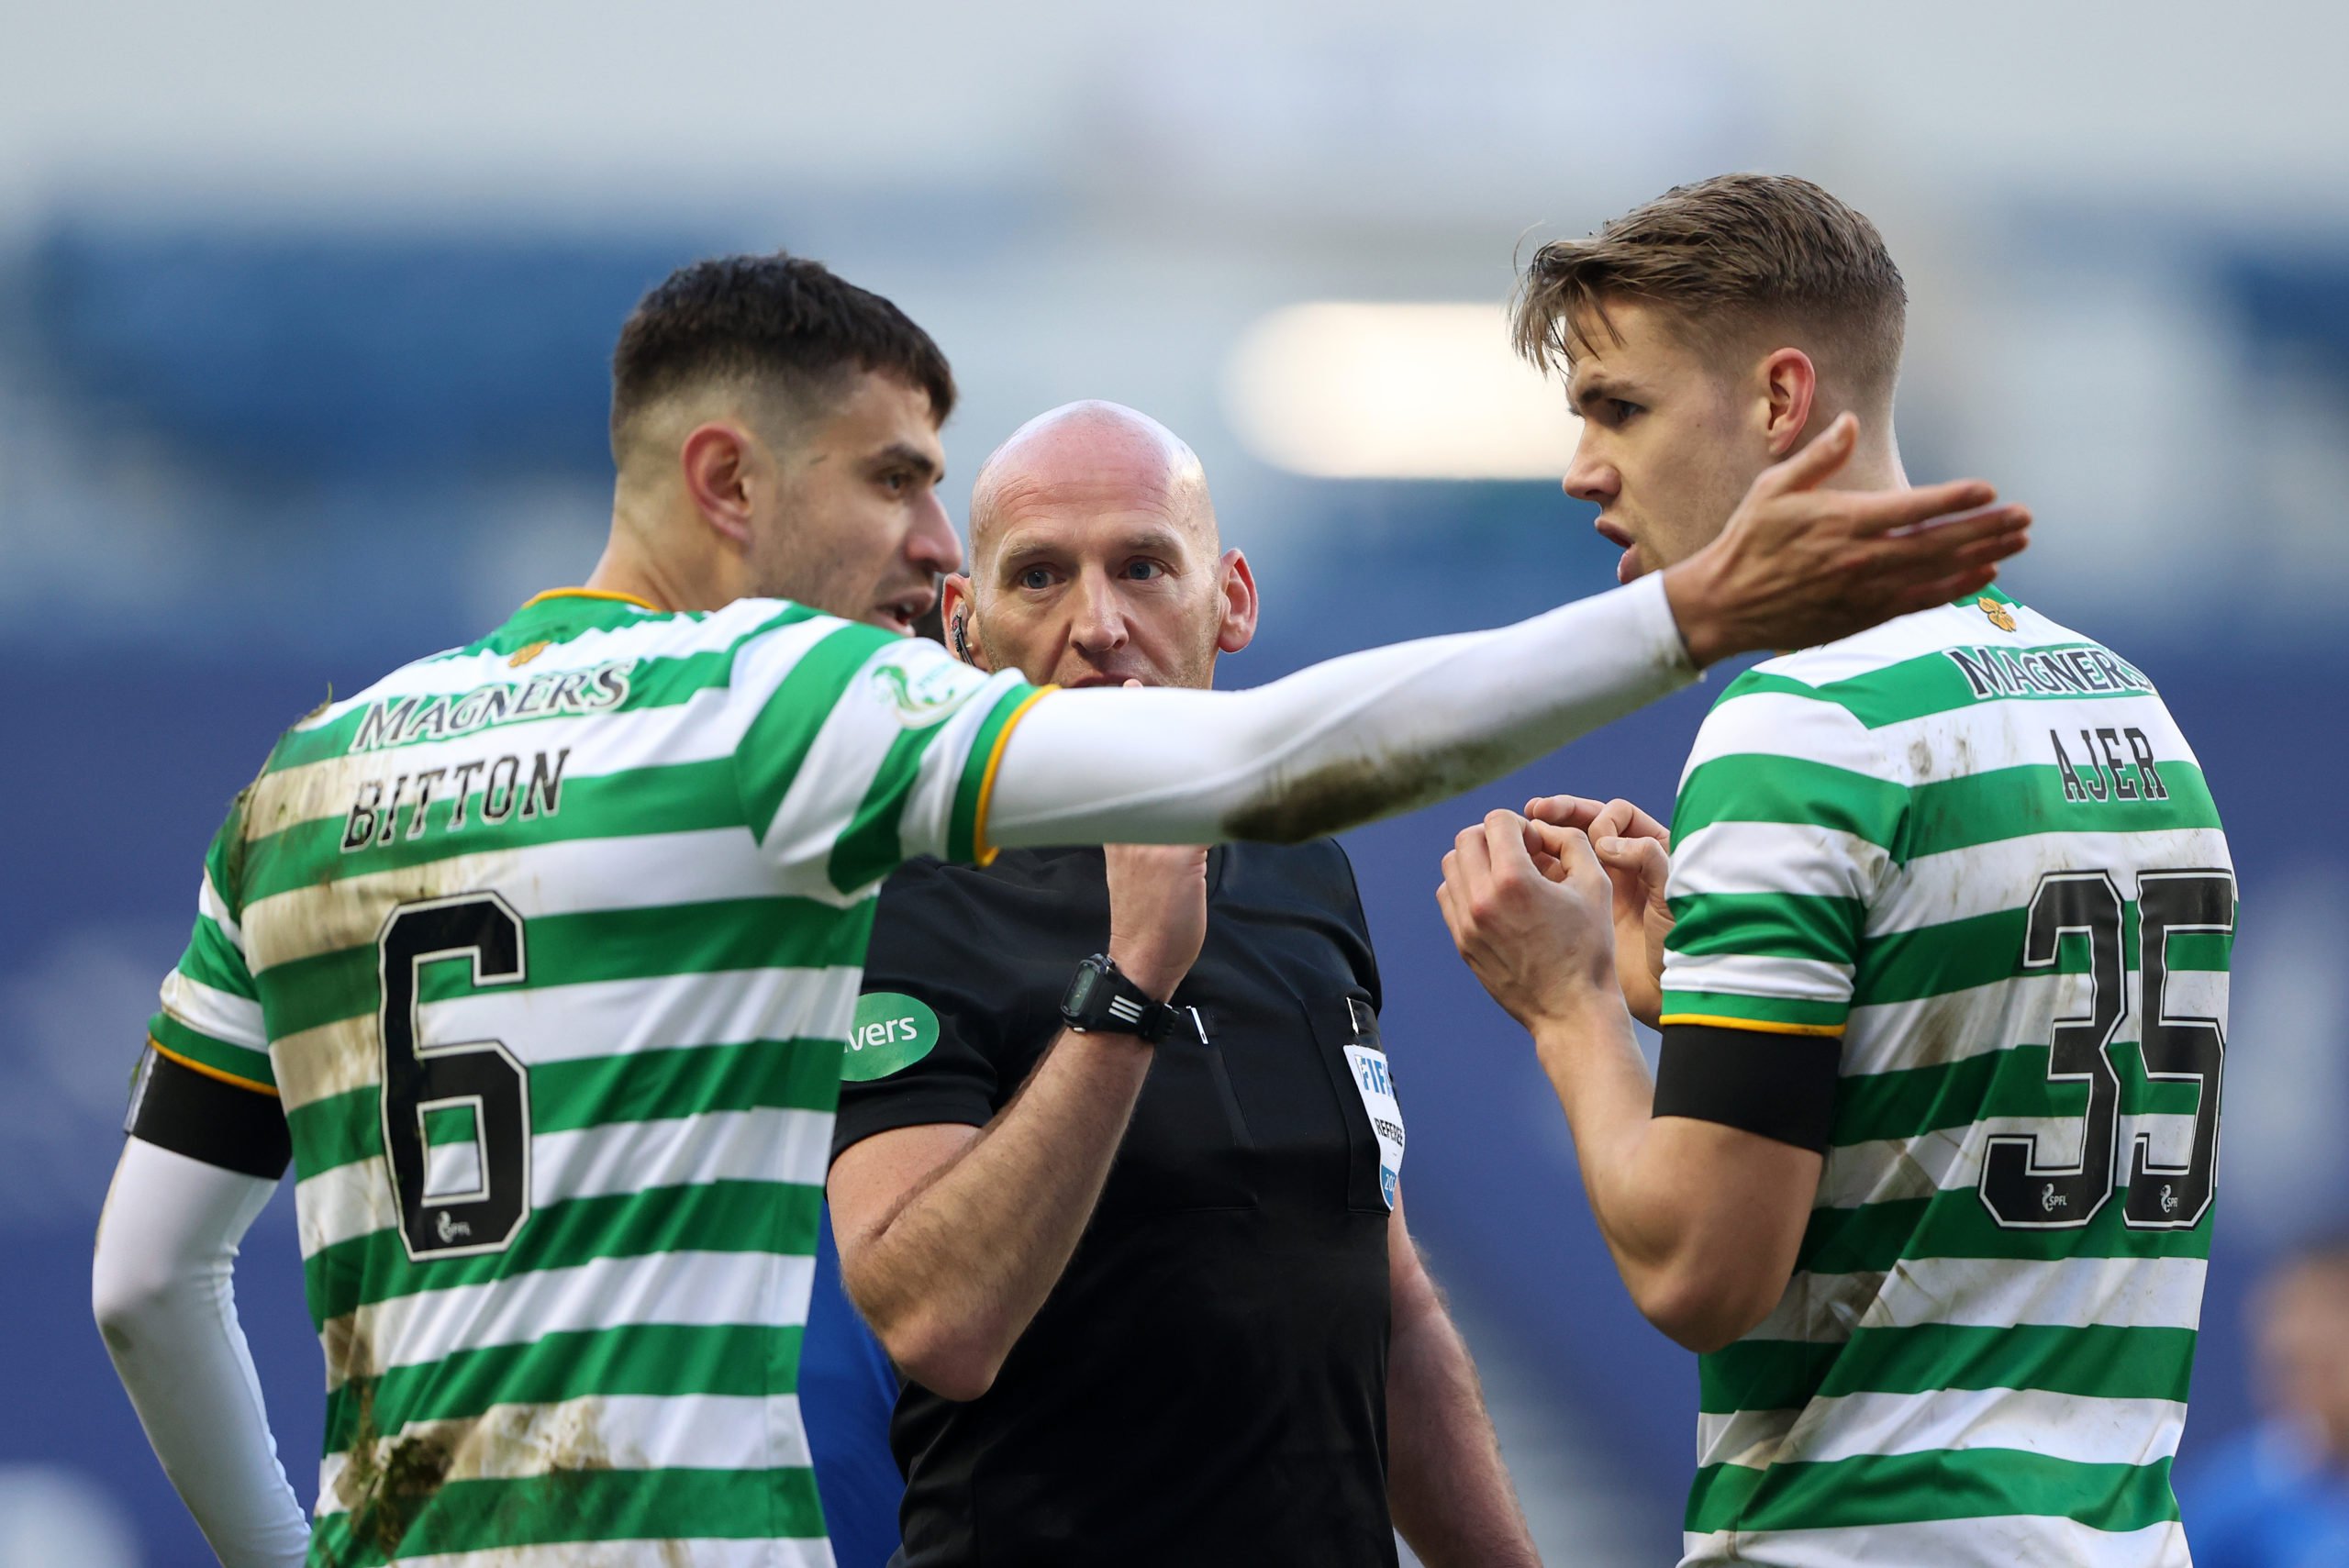 Celtic lose to Rangers at Ibrox; what happens now?